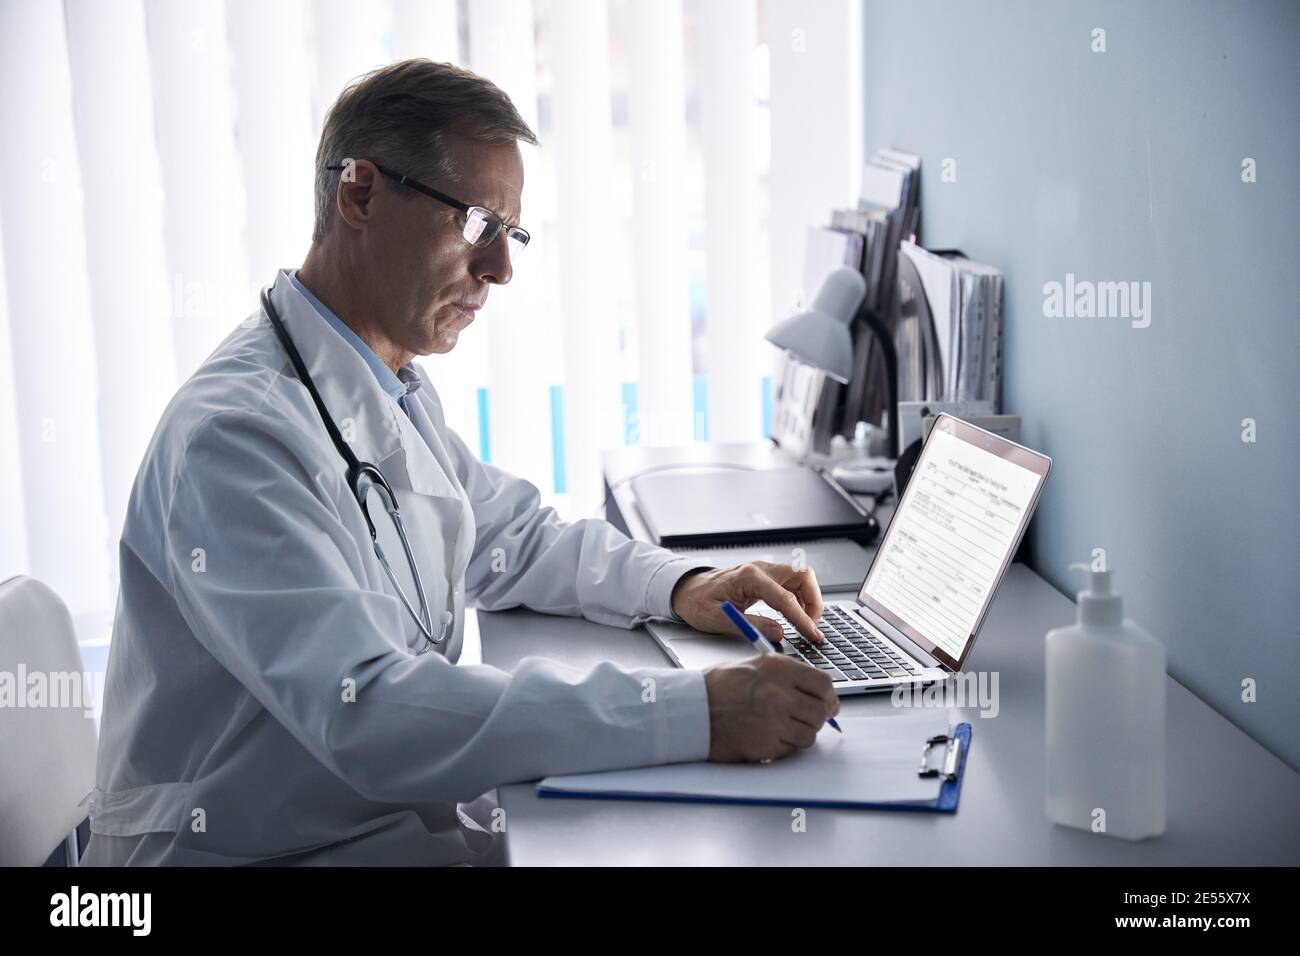 Serious mature doctor writing notes, using laptop in medical office. Stock Photo